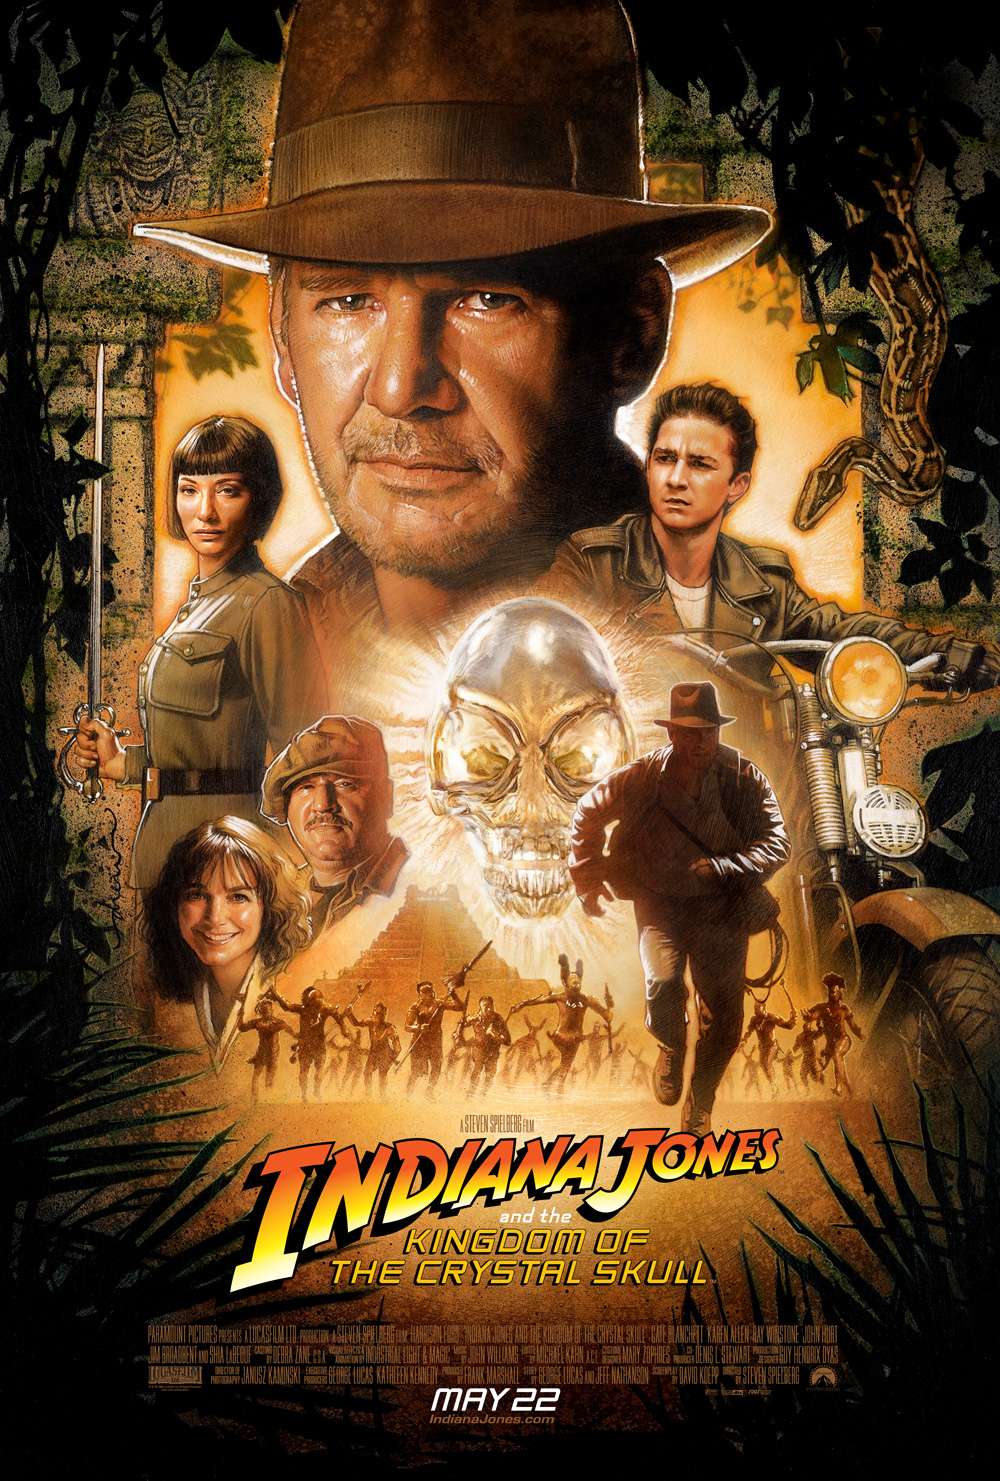 http://cinecido.files.wordpress.com/2008/05/indiana_jones_and_the_kingdom_of_the_crystal_skull_movie_poster_final_l1.jpg